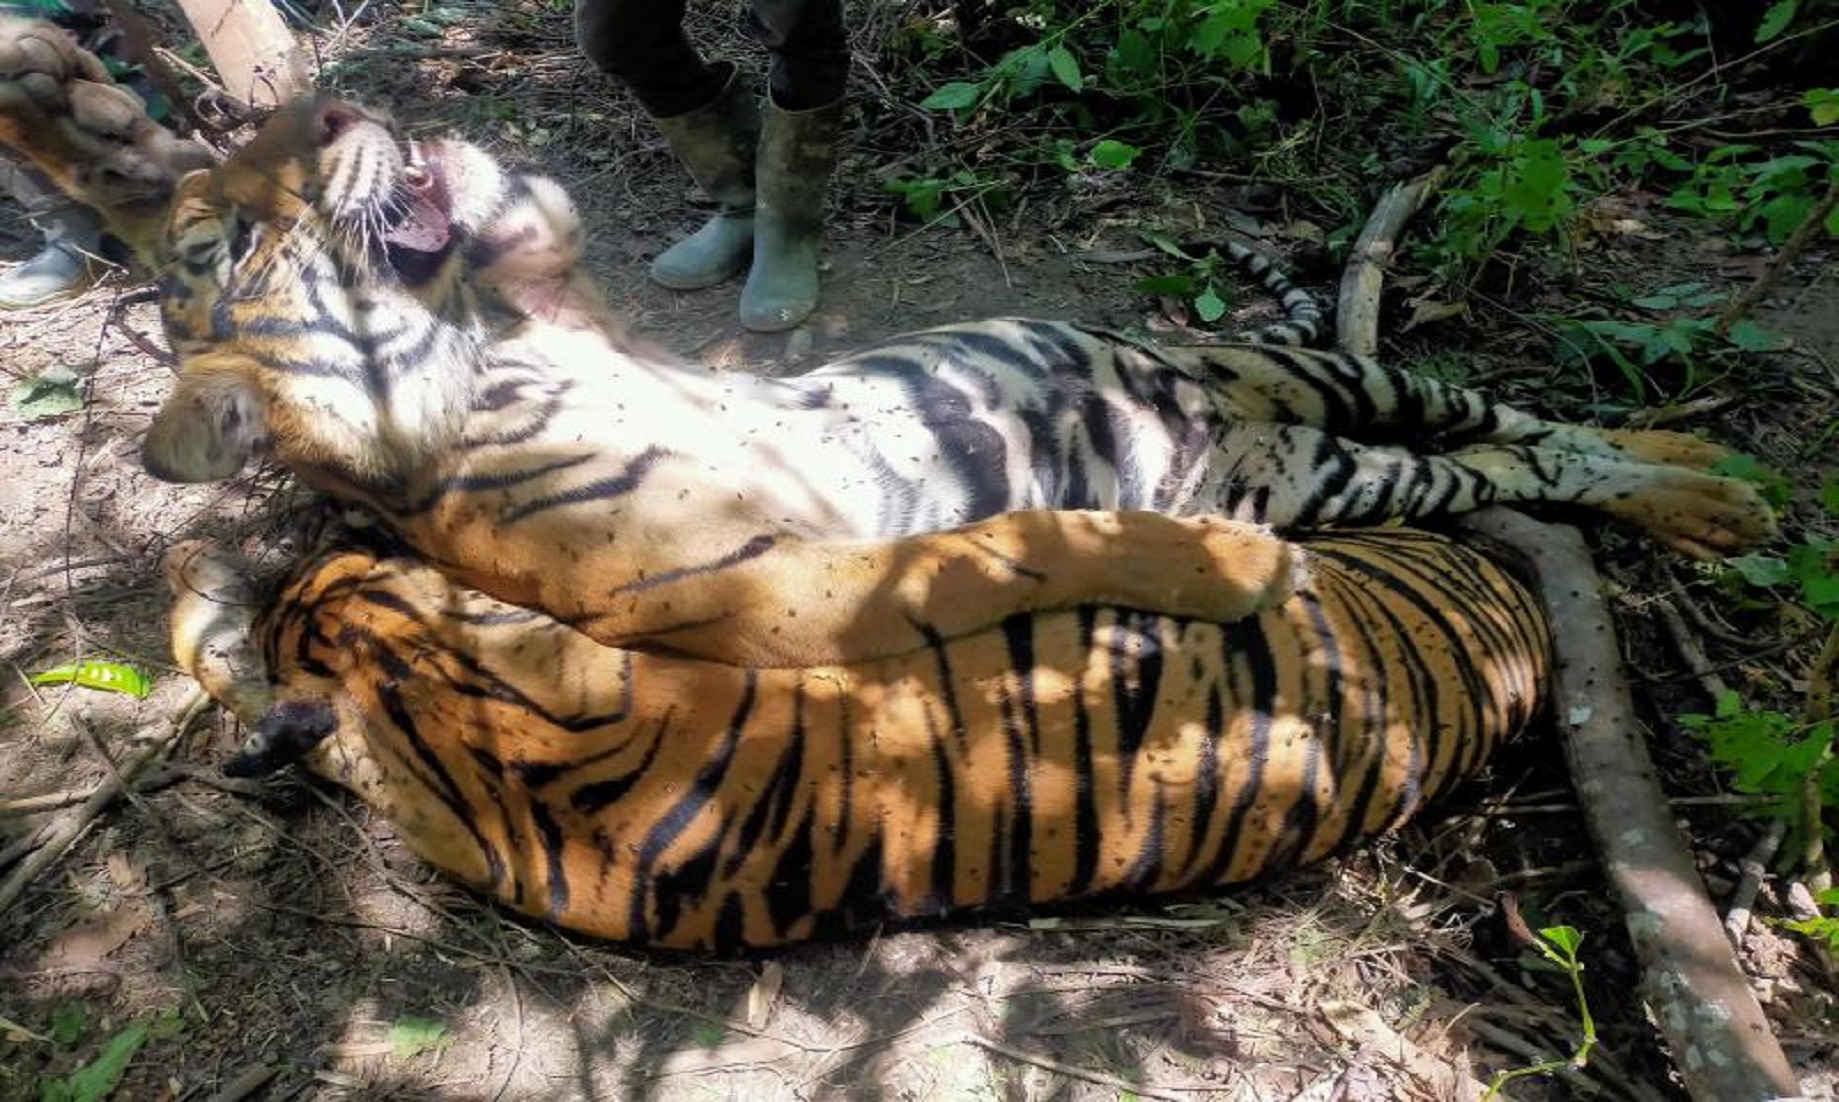 Three Critically Endangered Sumatran Tigers Found Dead In Snares In Indonesia